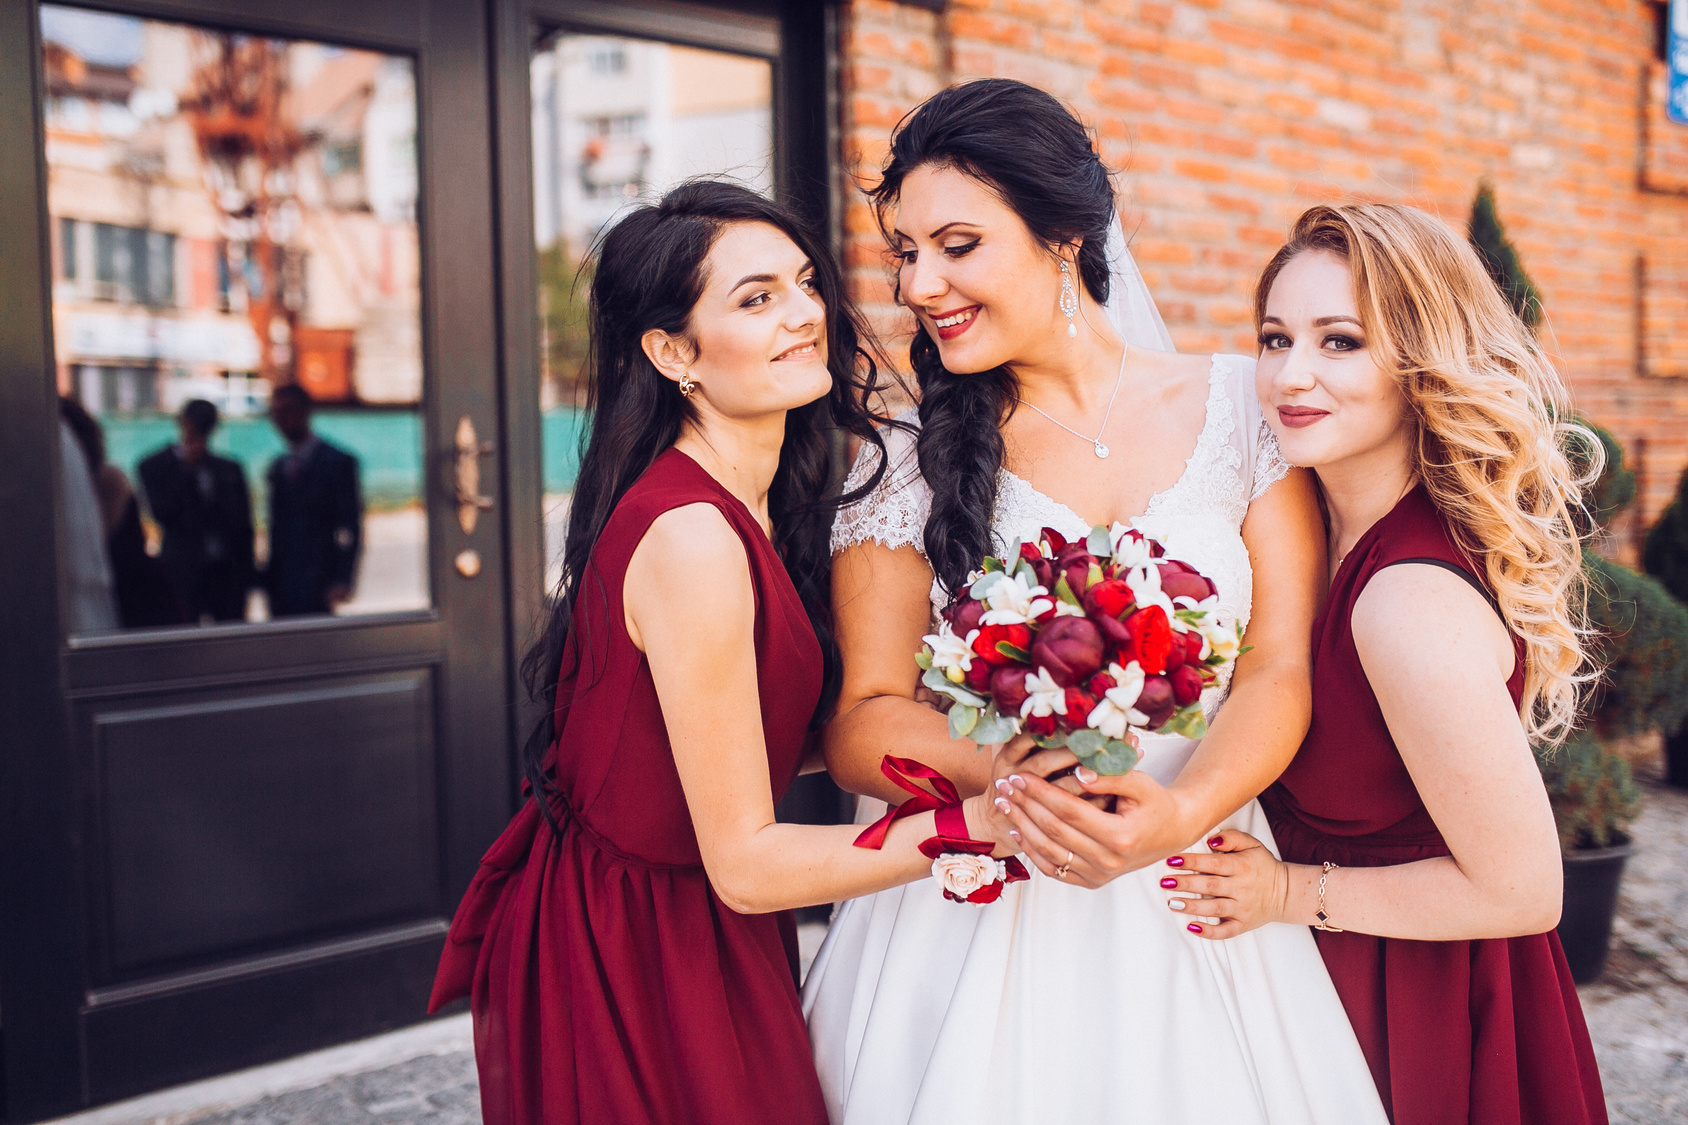 Laughing bride and bridesmaids tell funny stories